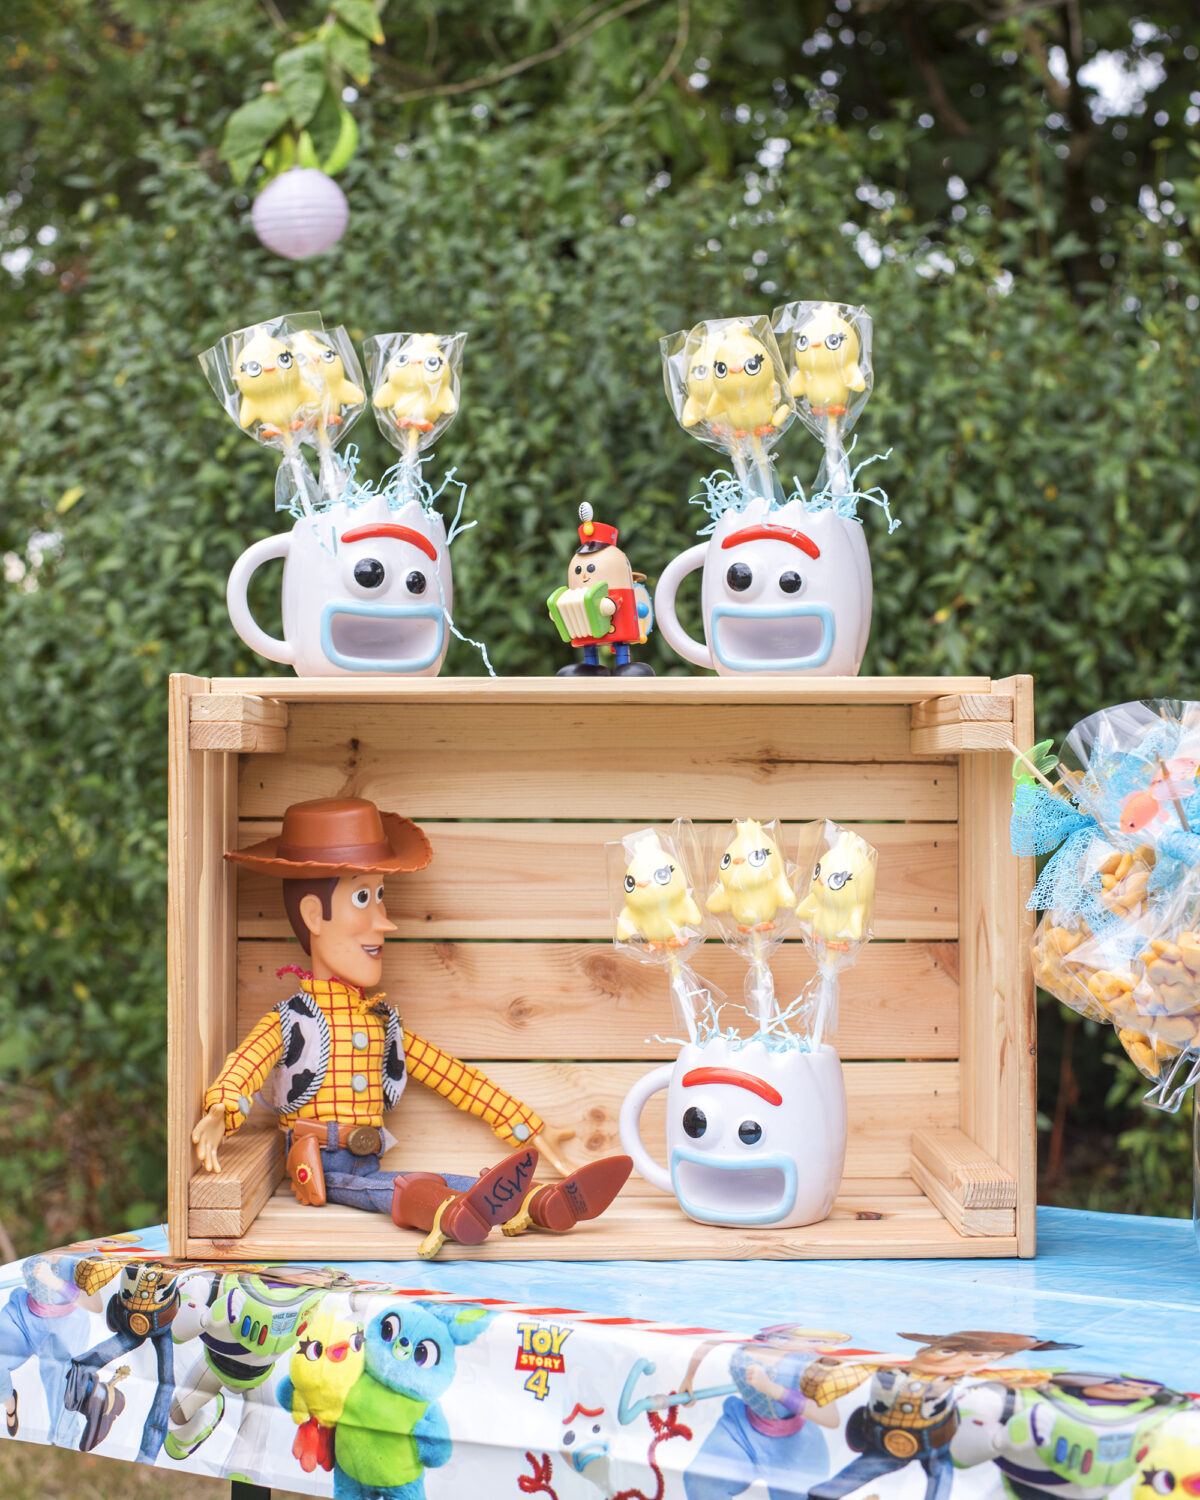 Image shows a party table with an upturned wooden ikea crate. Inside the crate sits a toy of Woody the Cowboy from Disney's Toy Story, and on top are three Forky shaped mugs filled with Ducky shaped cake pops. The original toy story pixar tinker toy is on top of the crate.